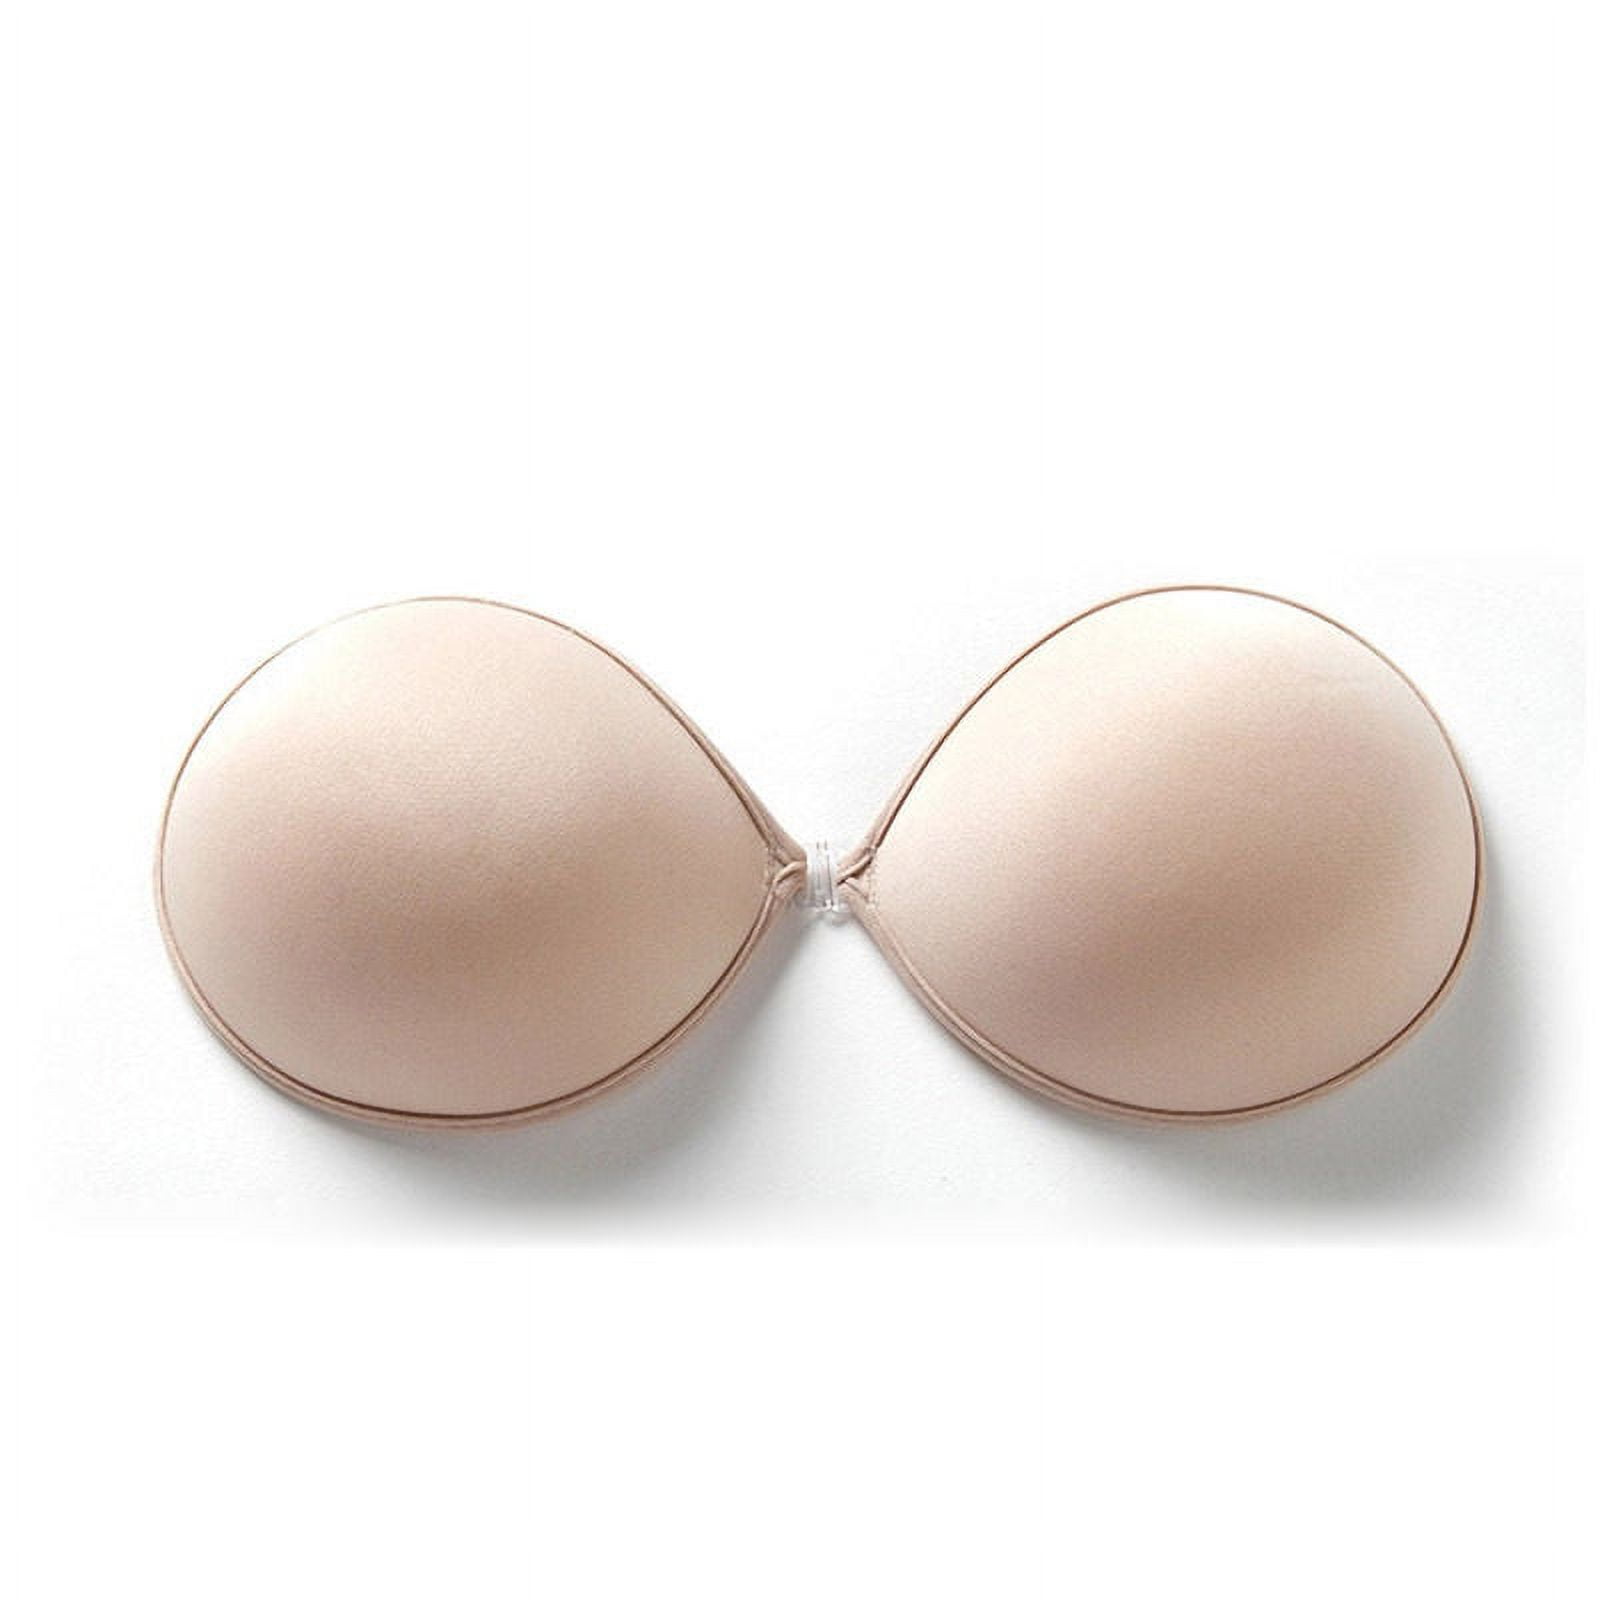 Women Invisible Bra Silicone Gel Strapless Backless Adhesive Stick On Push  Up US